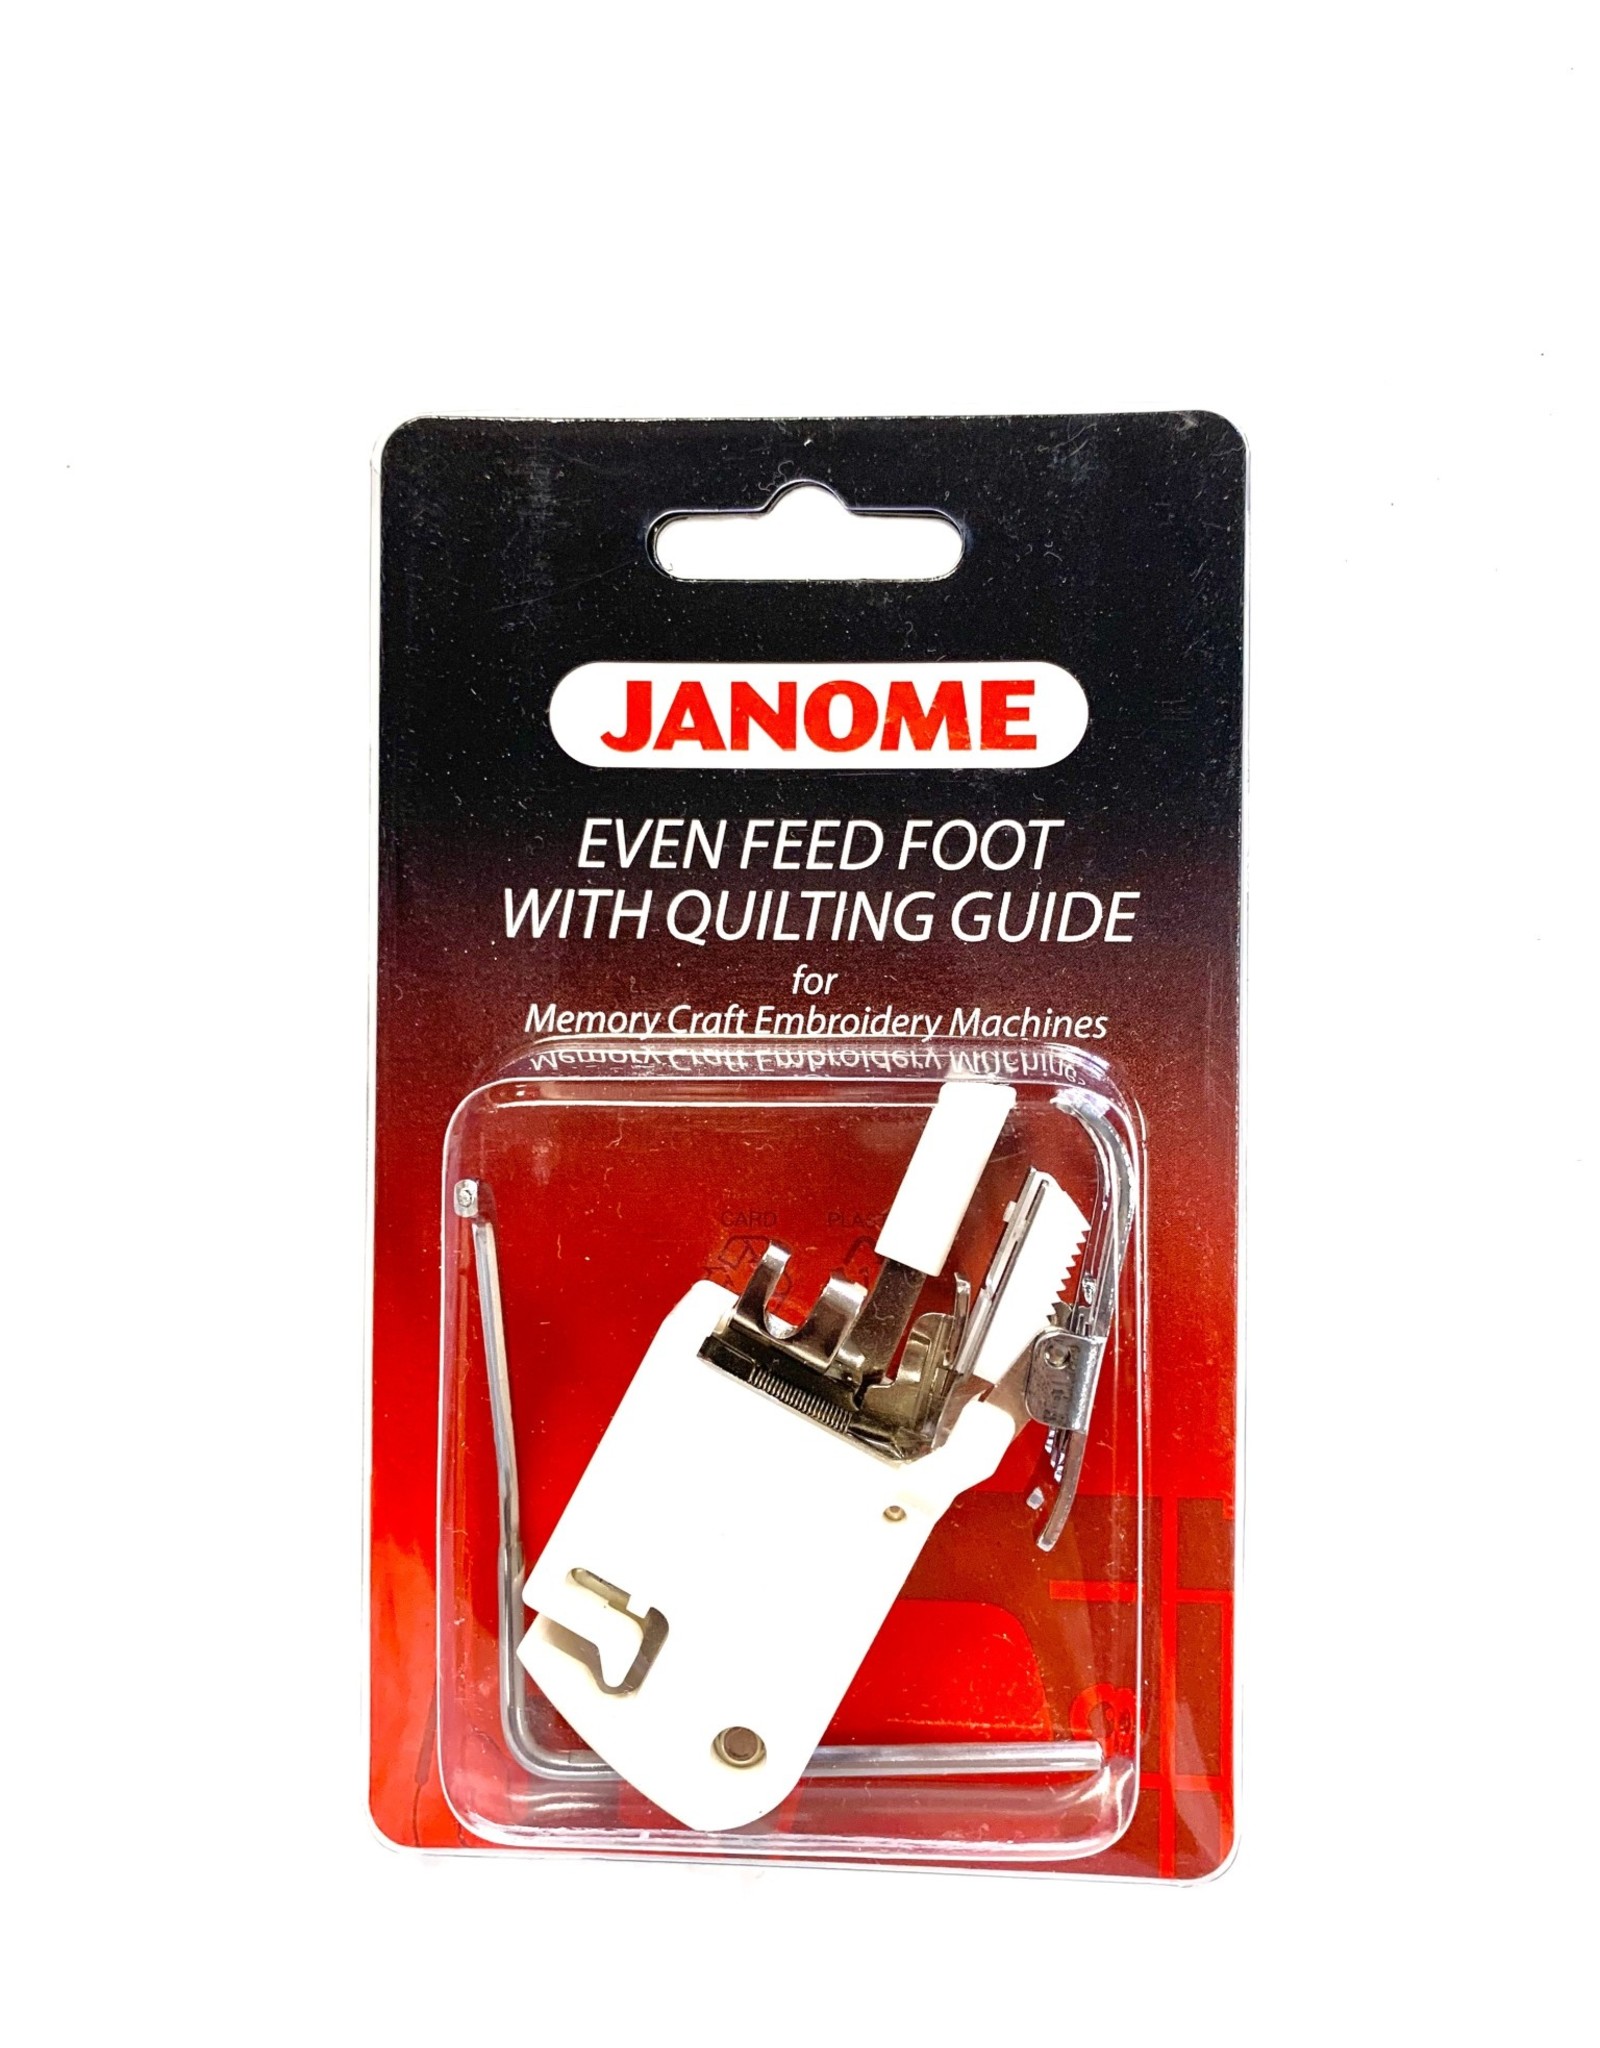 Janome Even Feed Foot With Quilting Guide (MC Embroidery Machine)- 200309008